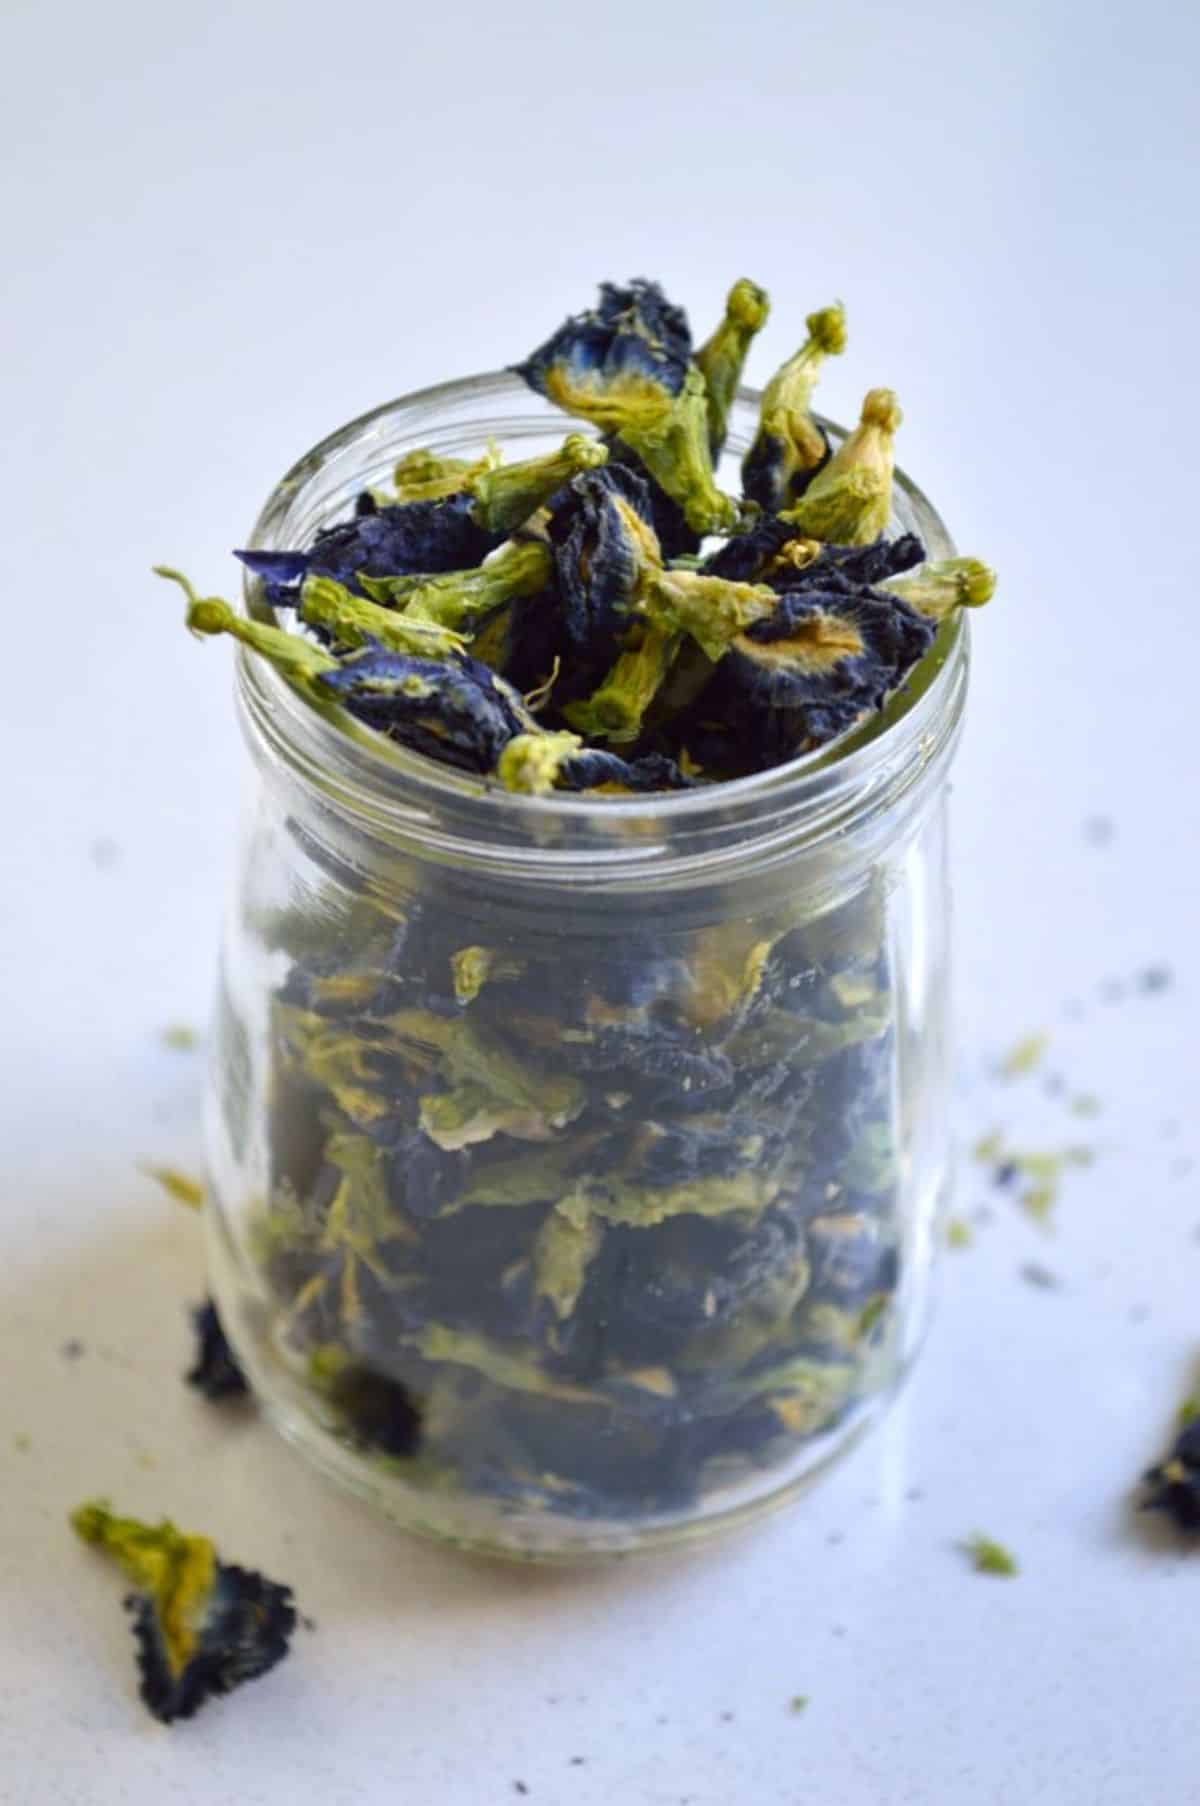 A glass jar full of dried pea flowers.